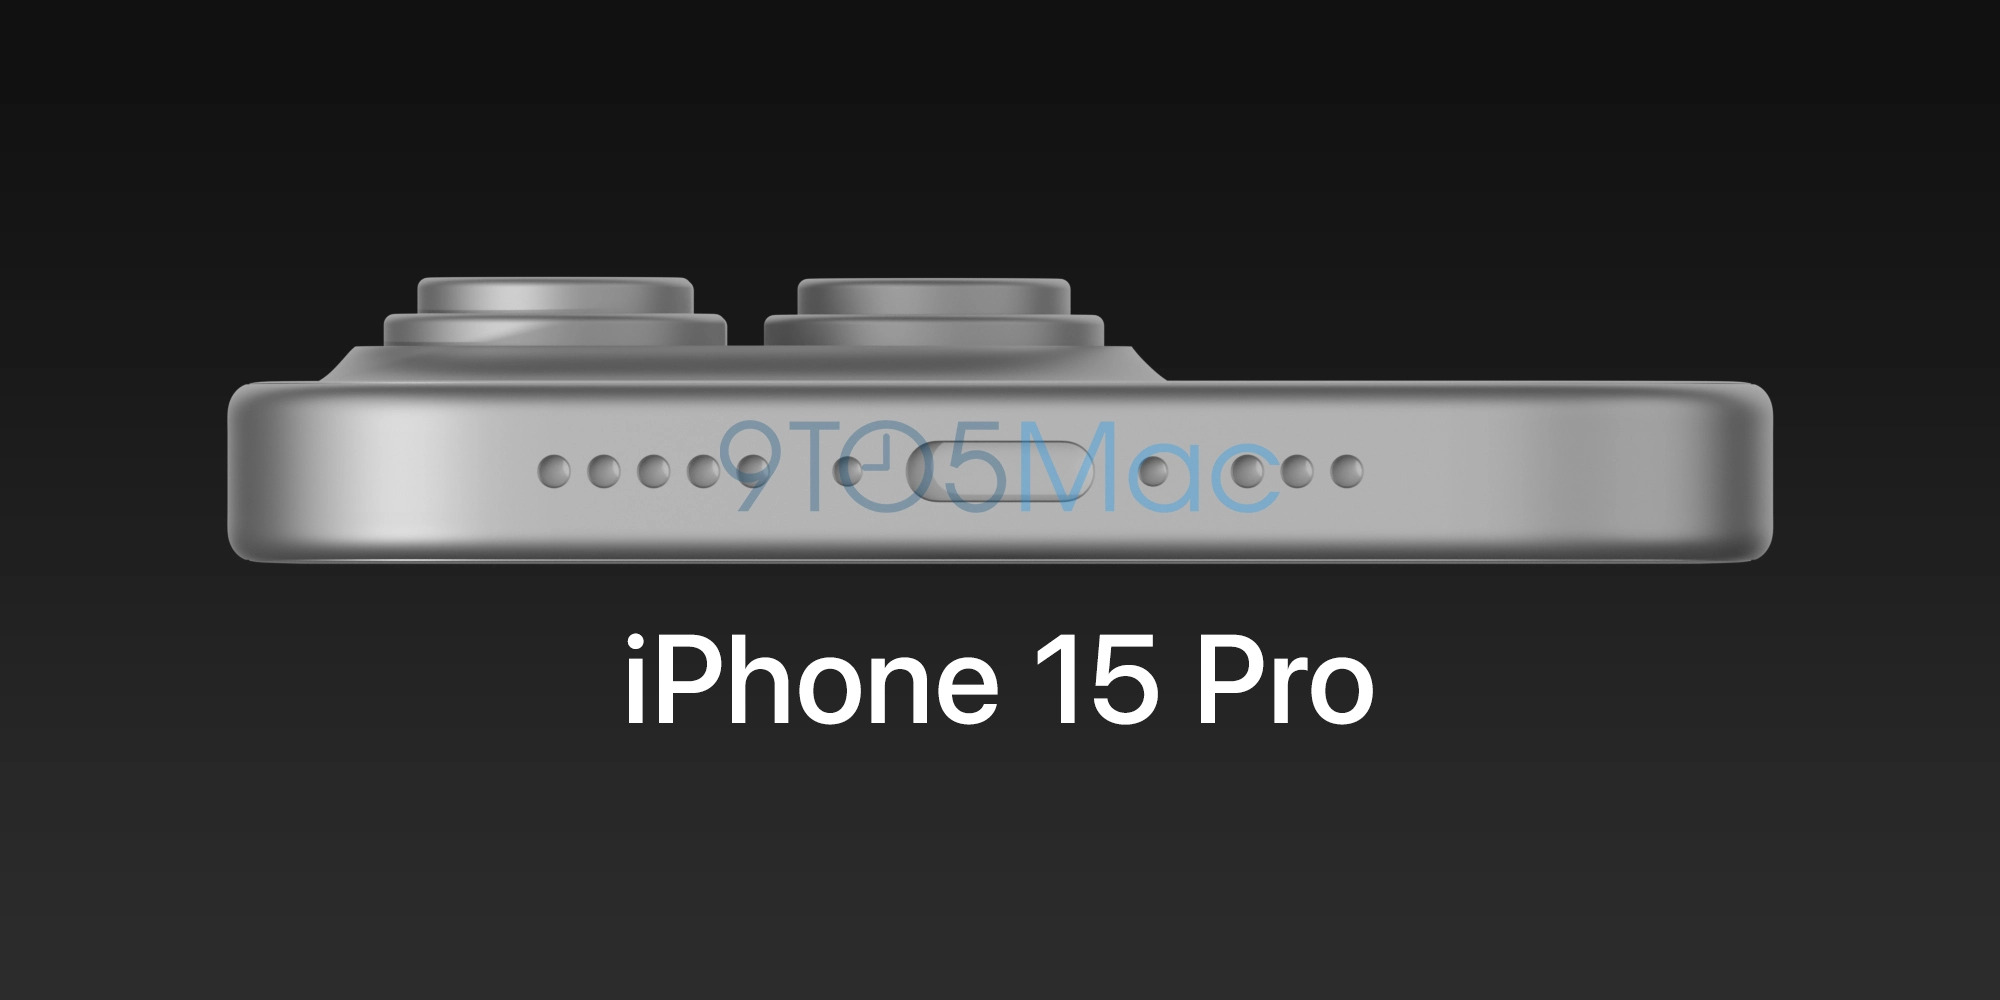 This may be our first look at an actual iPhone 15